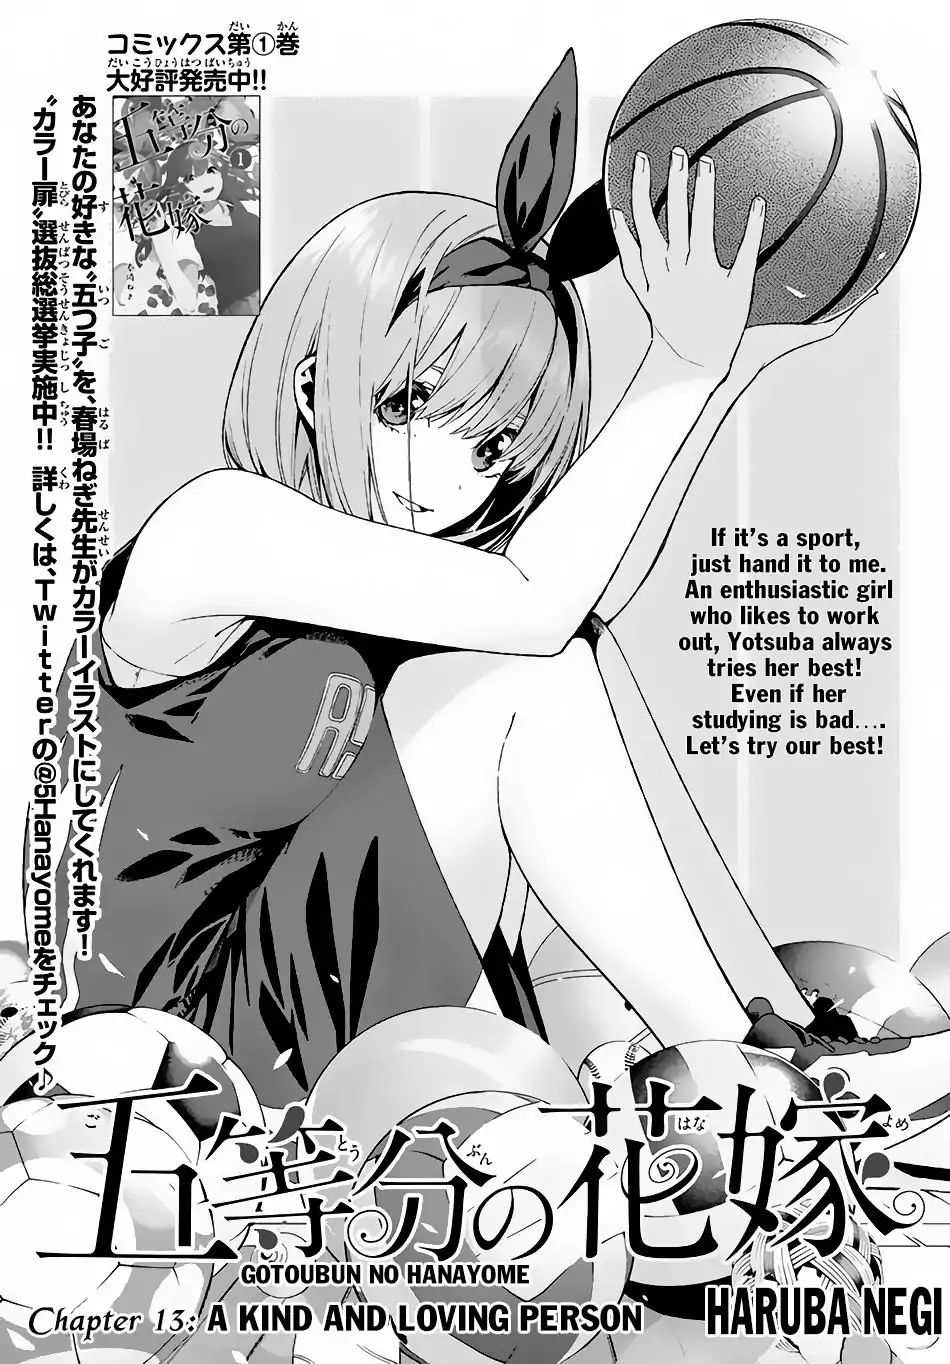 Go-Toubun No Hanayome Vol.2 Chapter 13: A Kind And Loving Person - Picture 2